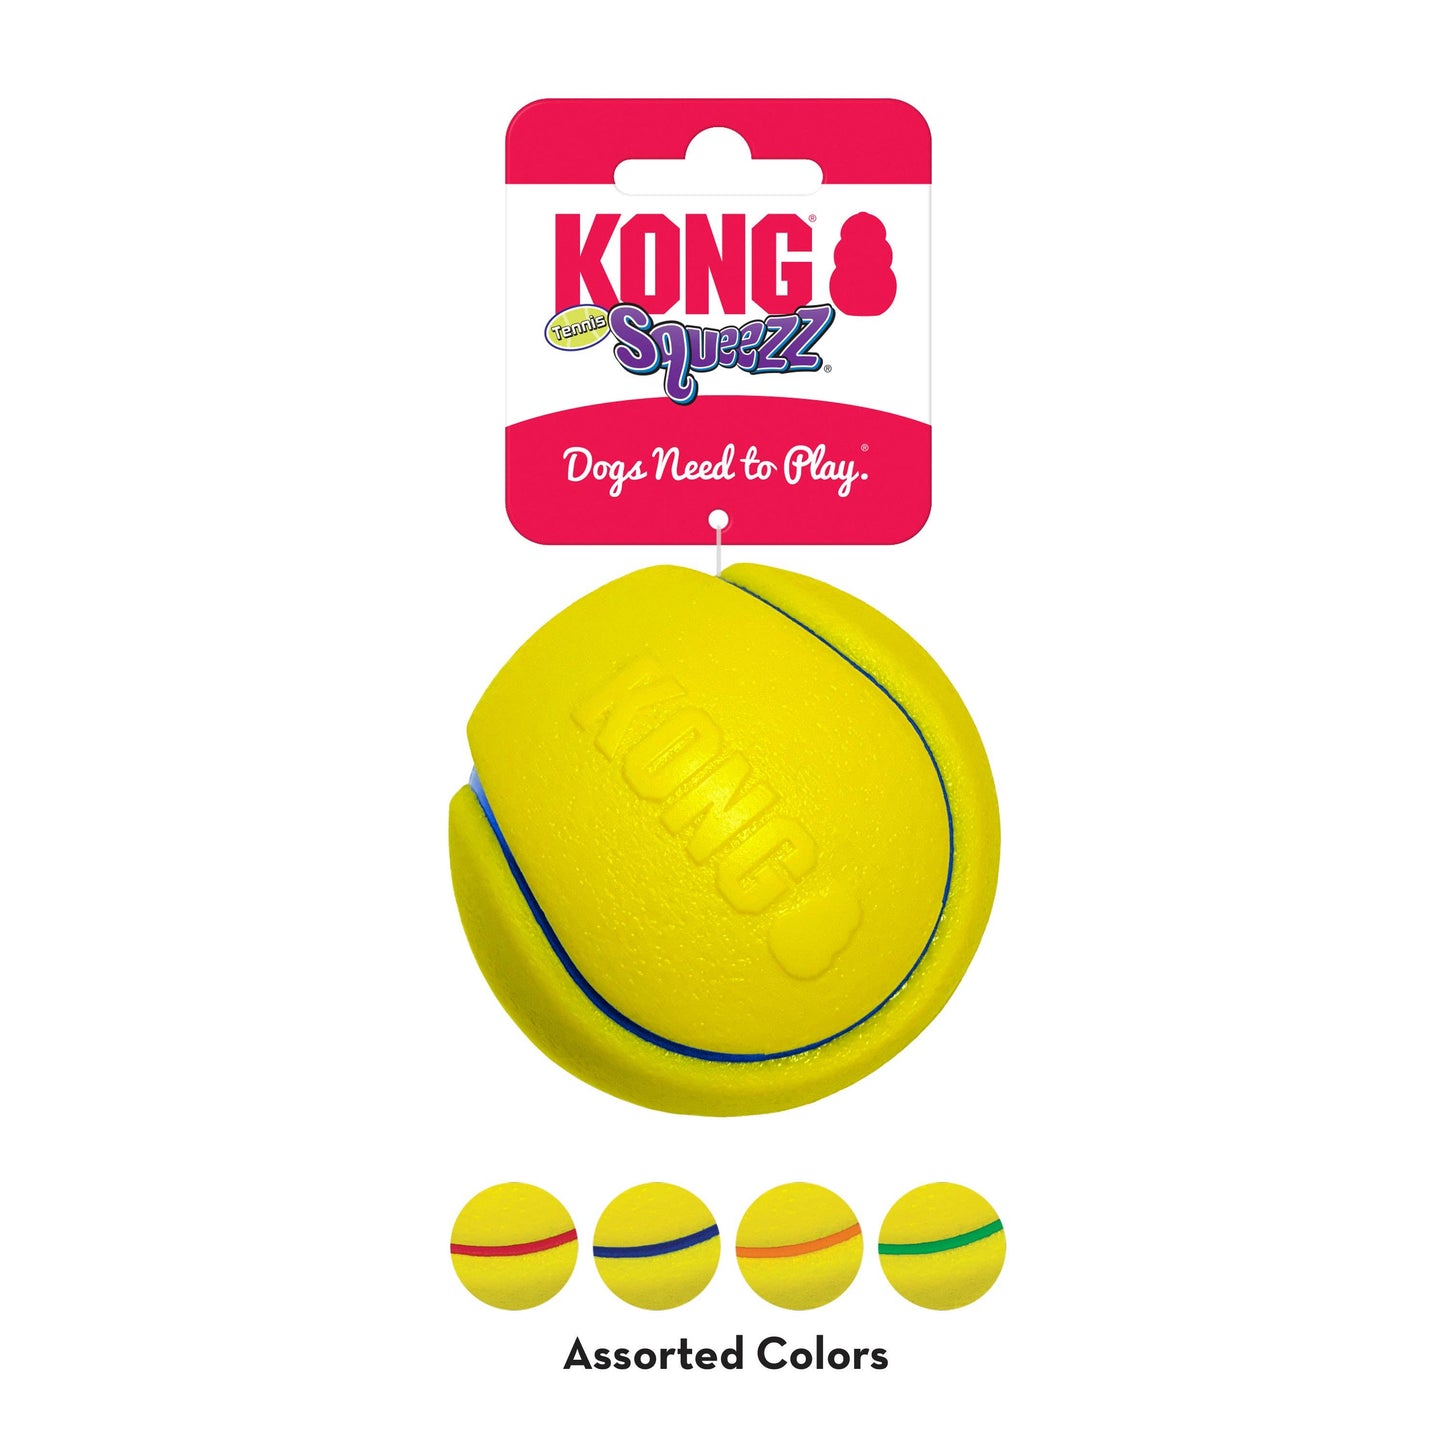 KONG Squeezz Tennis Ball Dog Toy